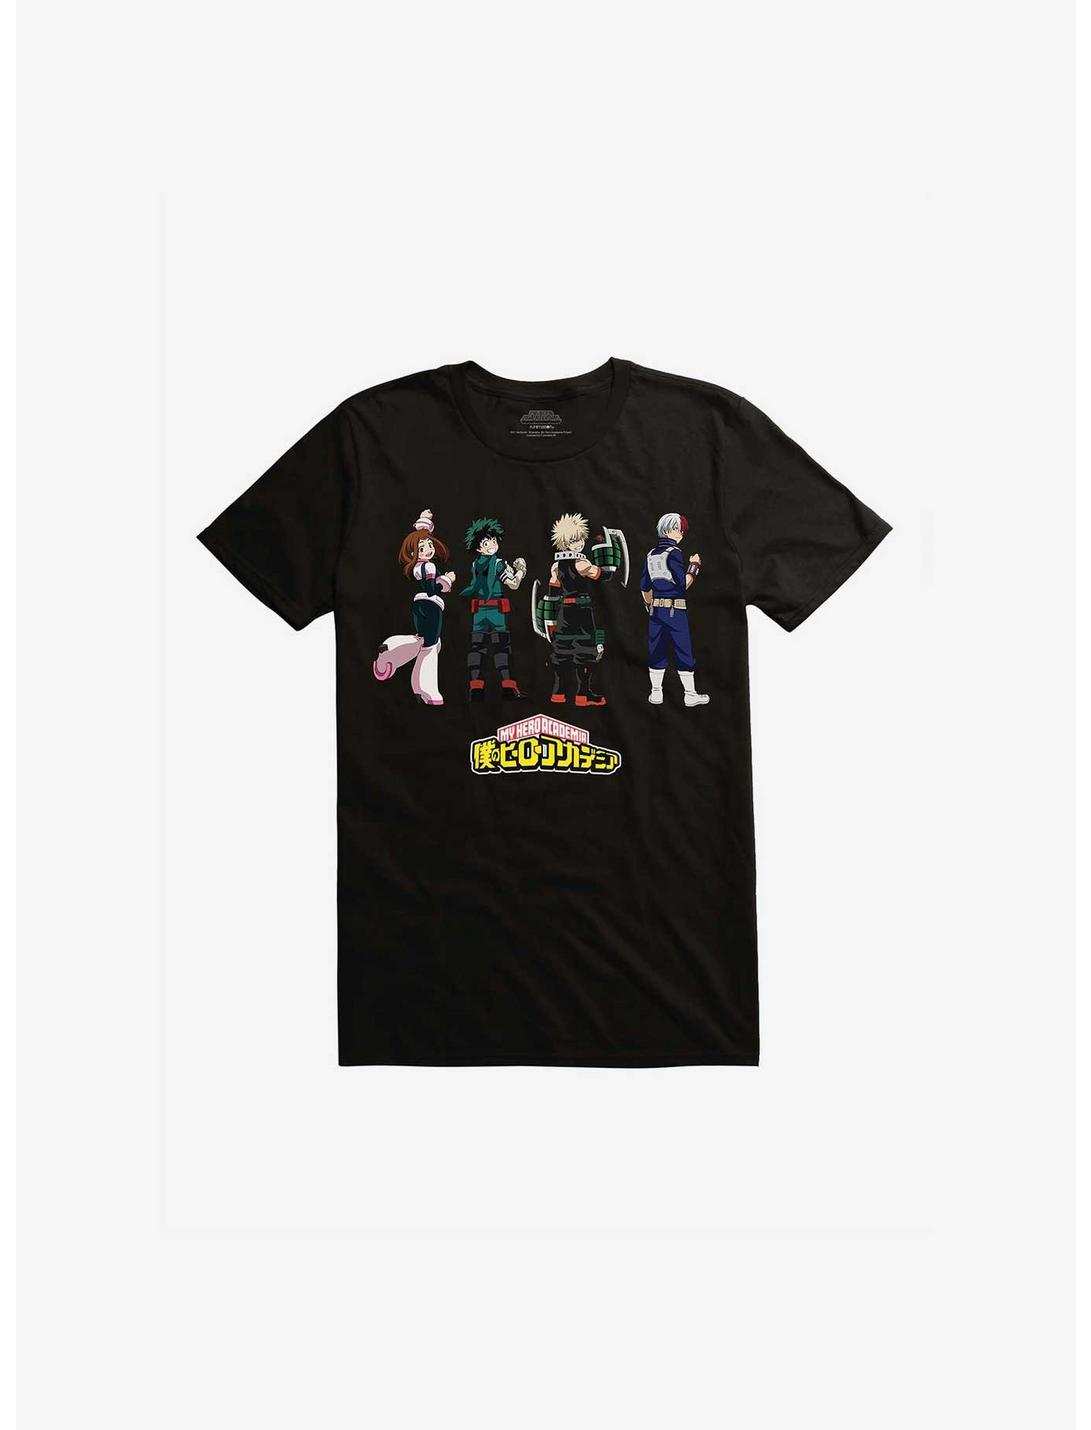 My Hero Academia Class 1A Quirk Suit T-Shirt, BLACK, hi-res